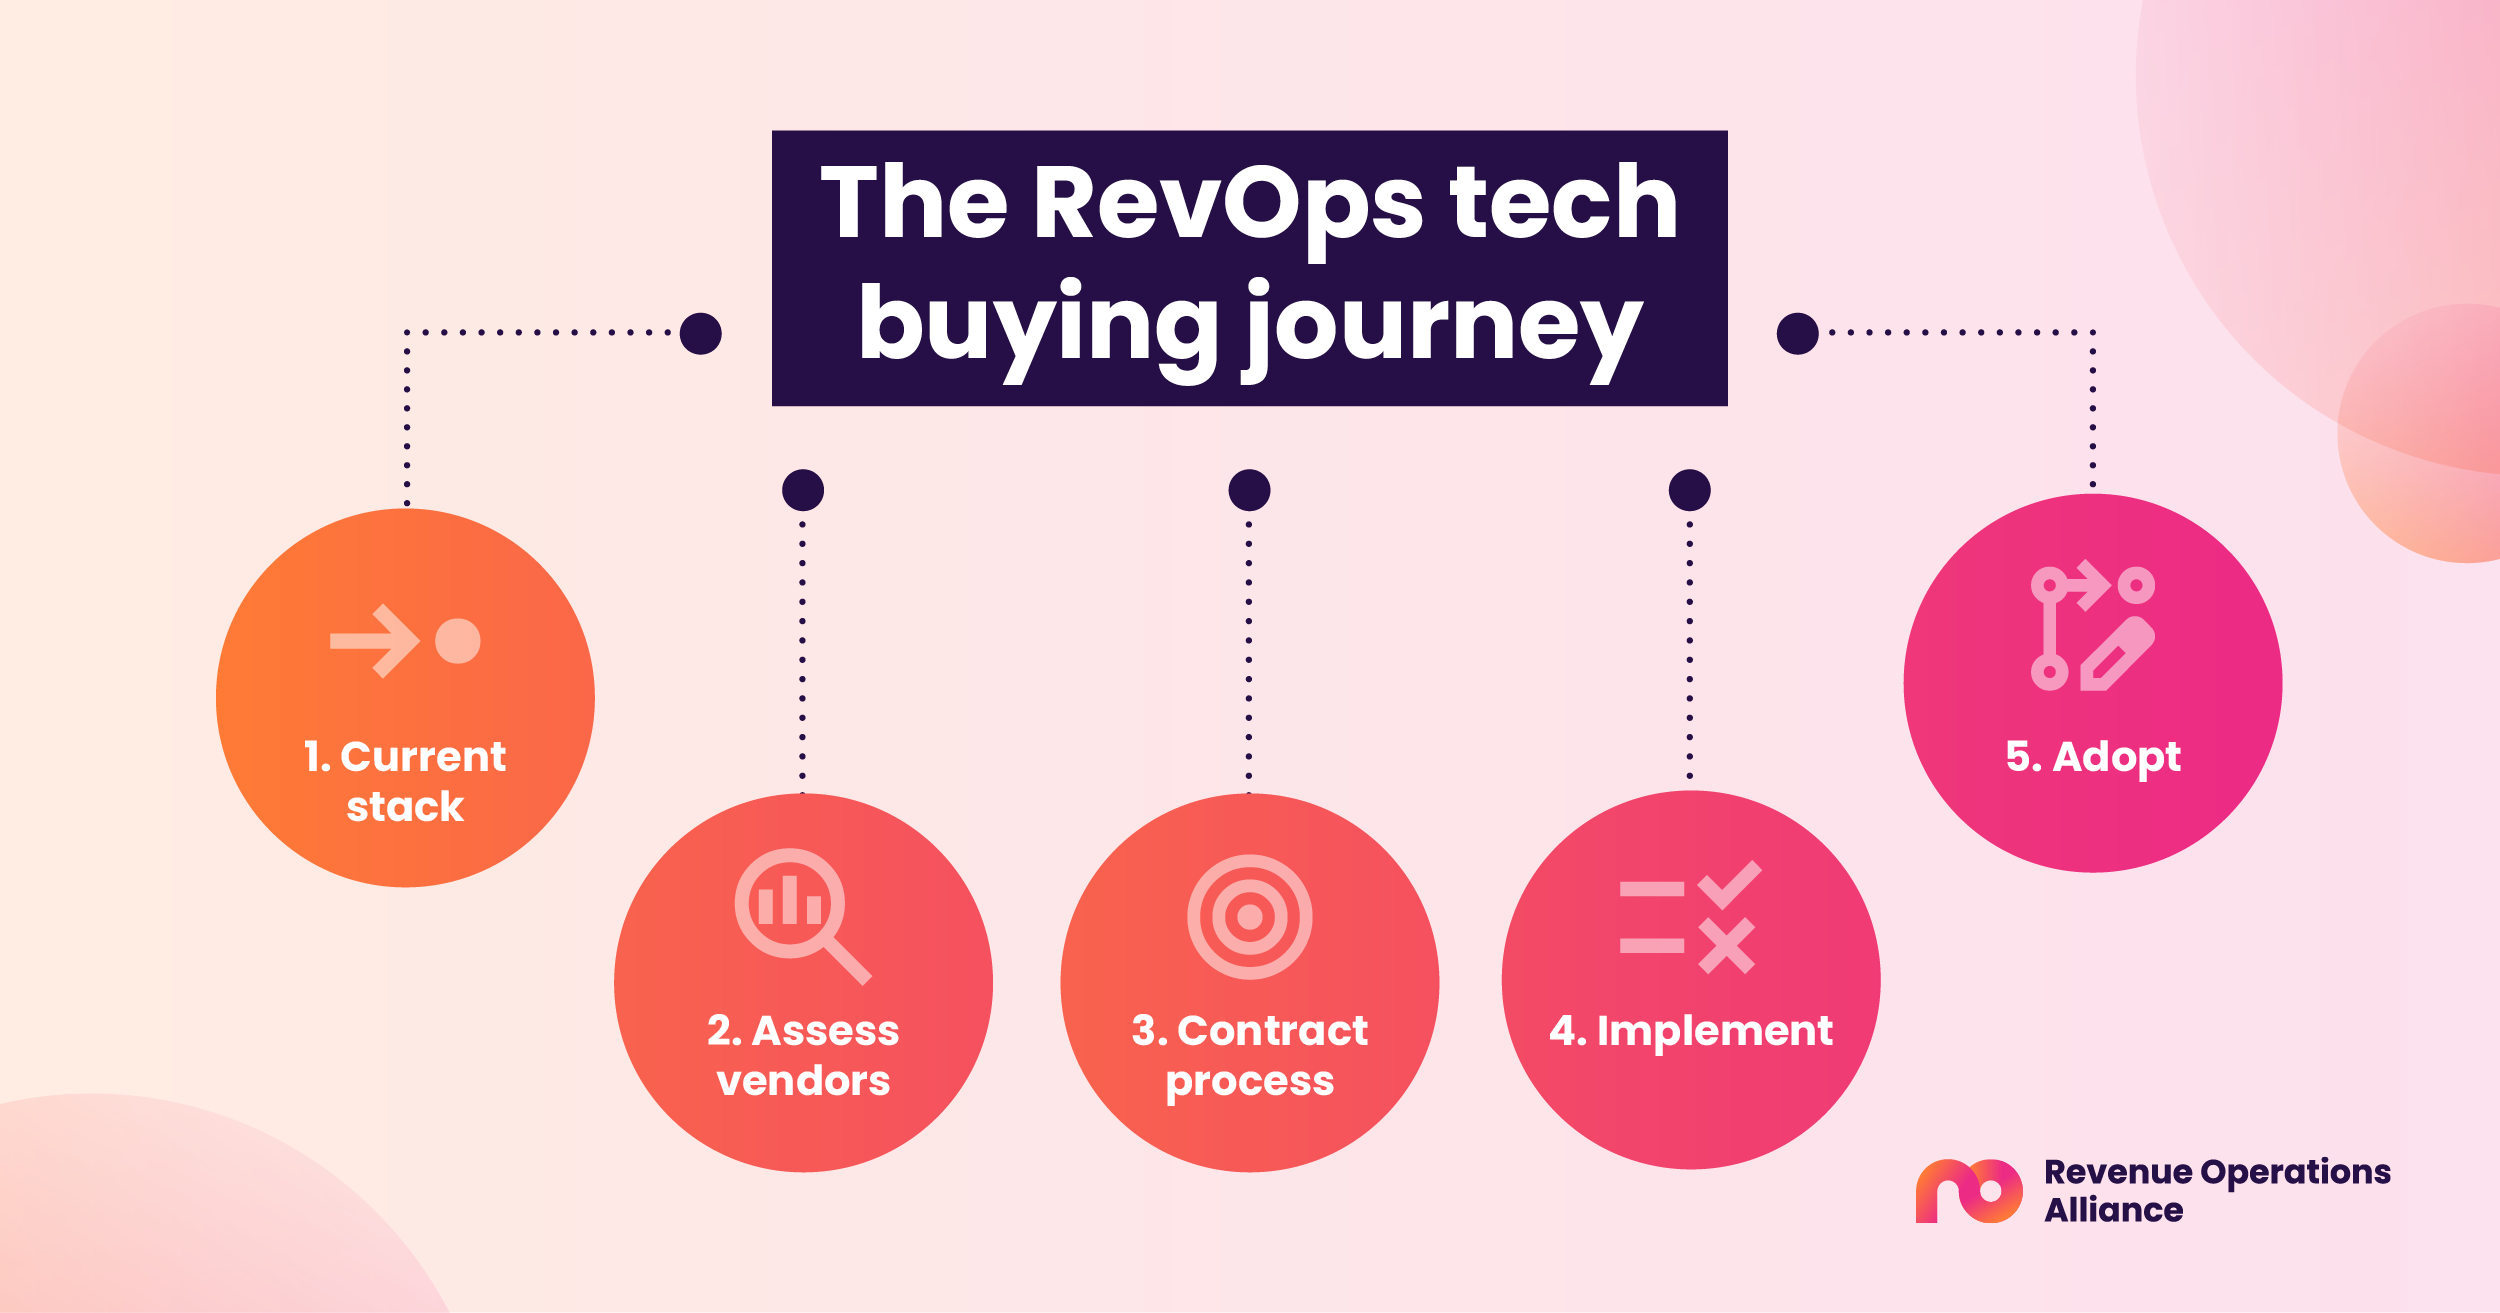 The RevOps tech buying journey: 1. Current stack. 2. Assess vendors. 3. Contract processes. 4. Implement. 5. Adopt.